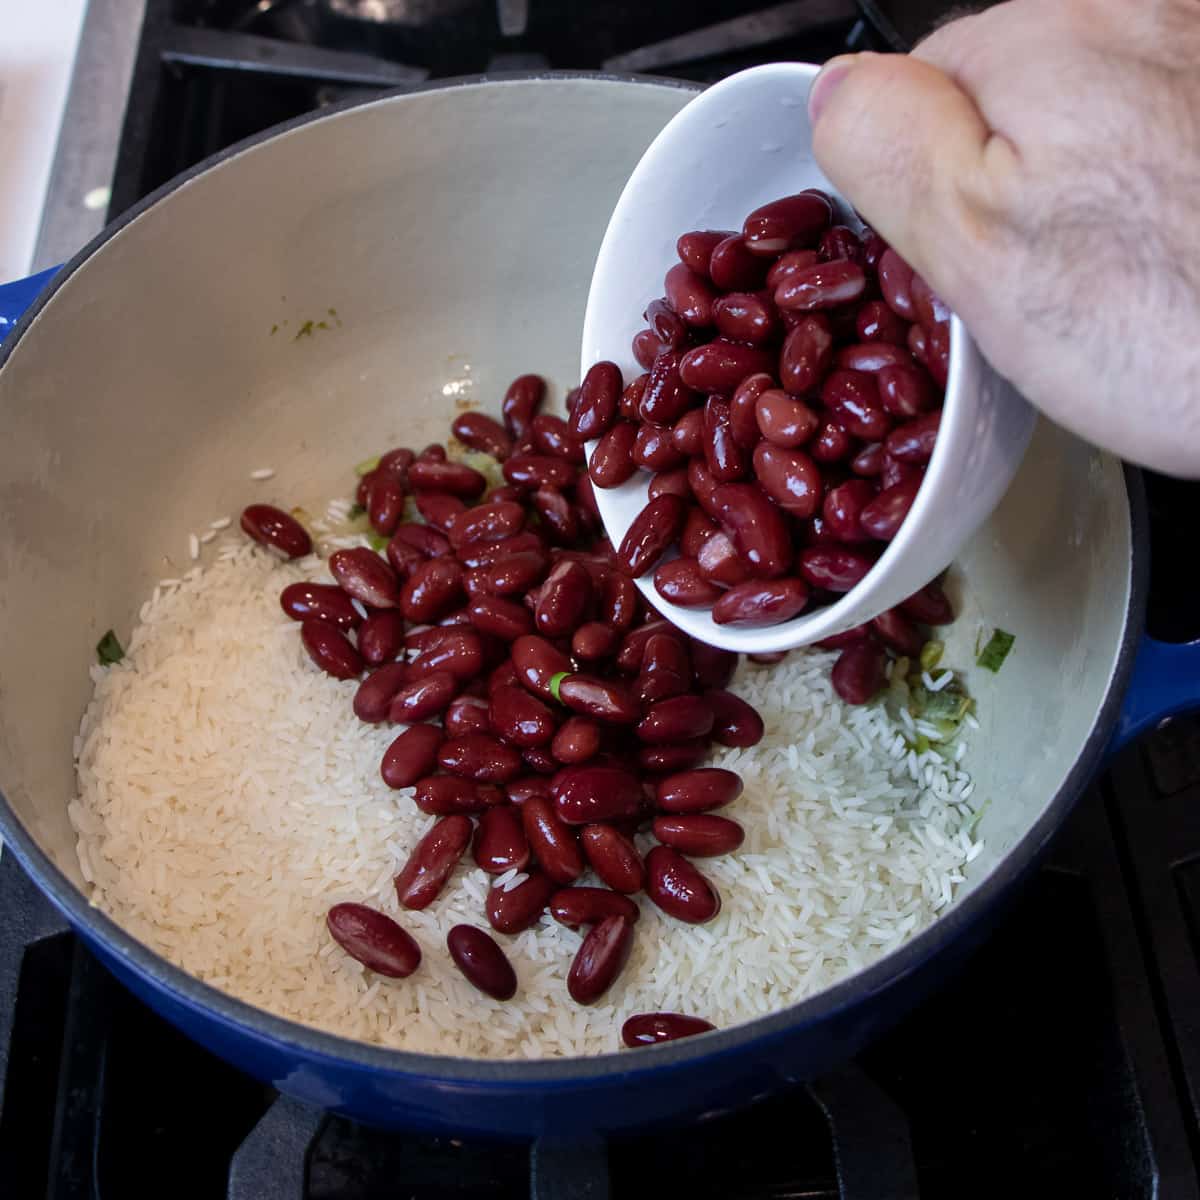 Adding the kidney beans and rice to the pot.